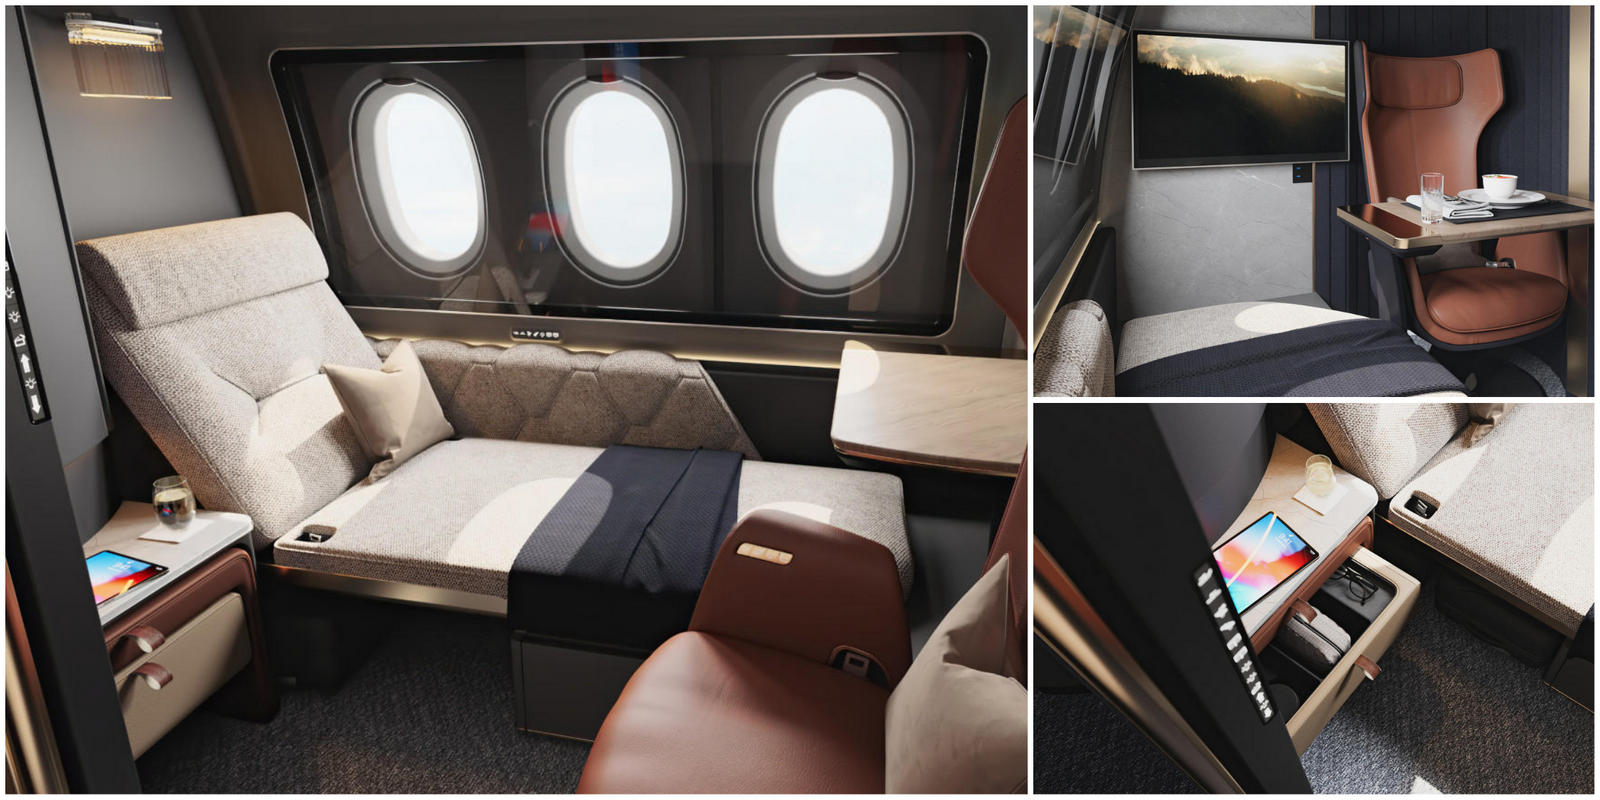 Experience the Future of Luxury Travel with Our Plush Rotating Suite!